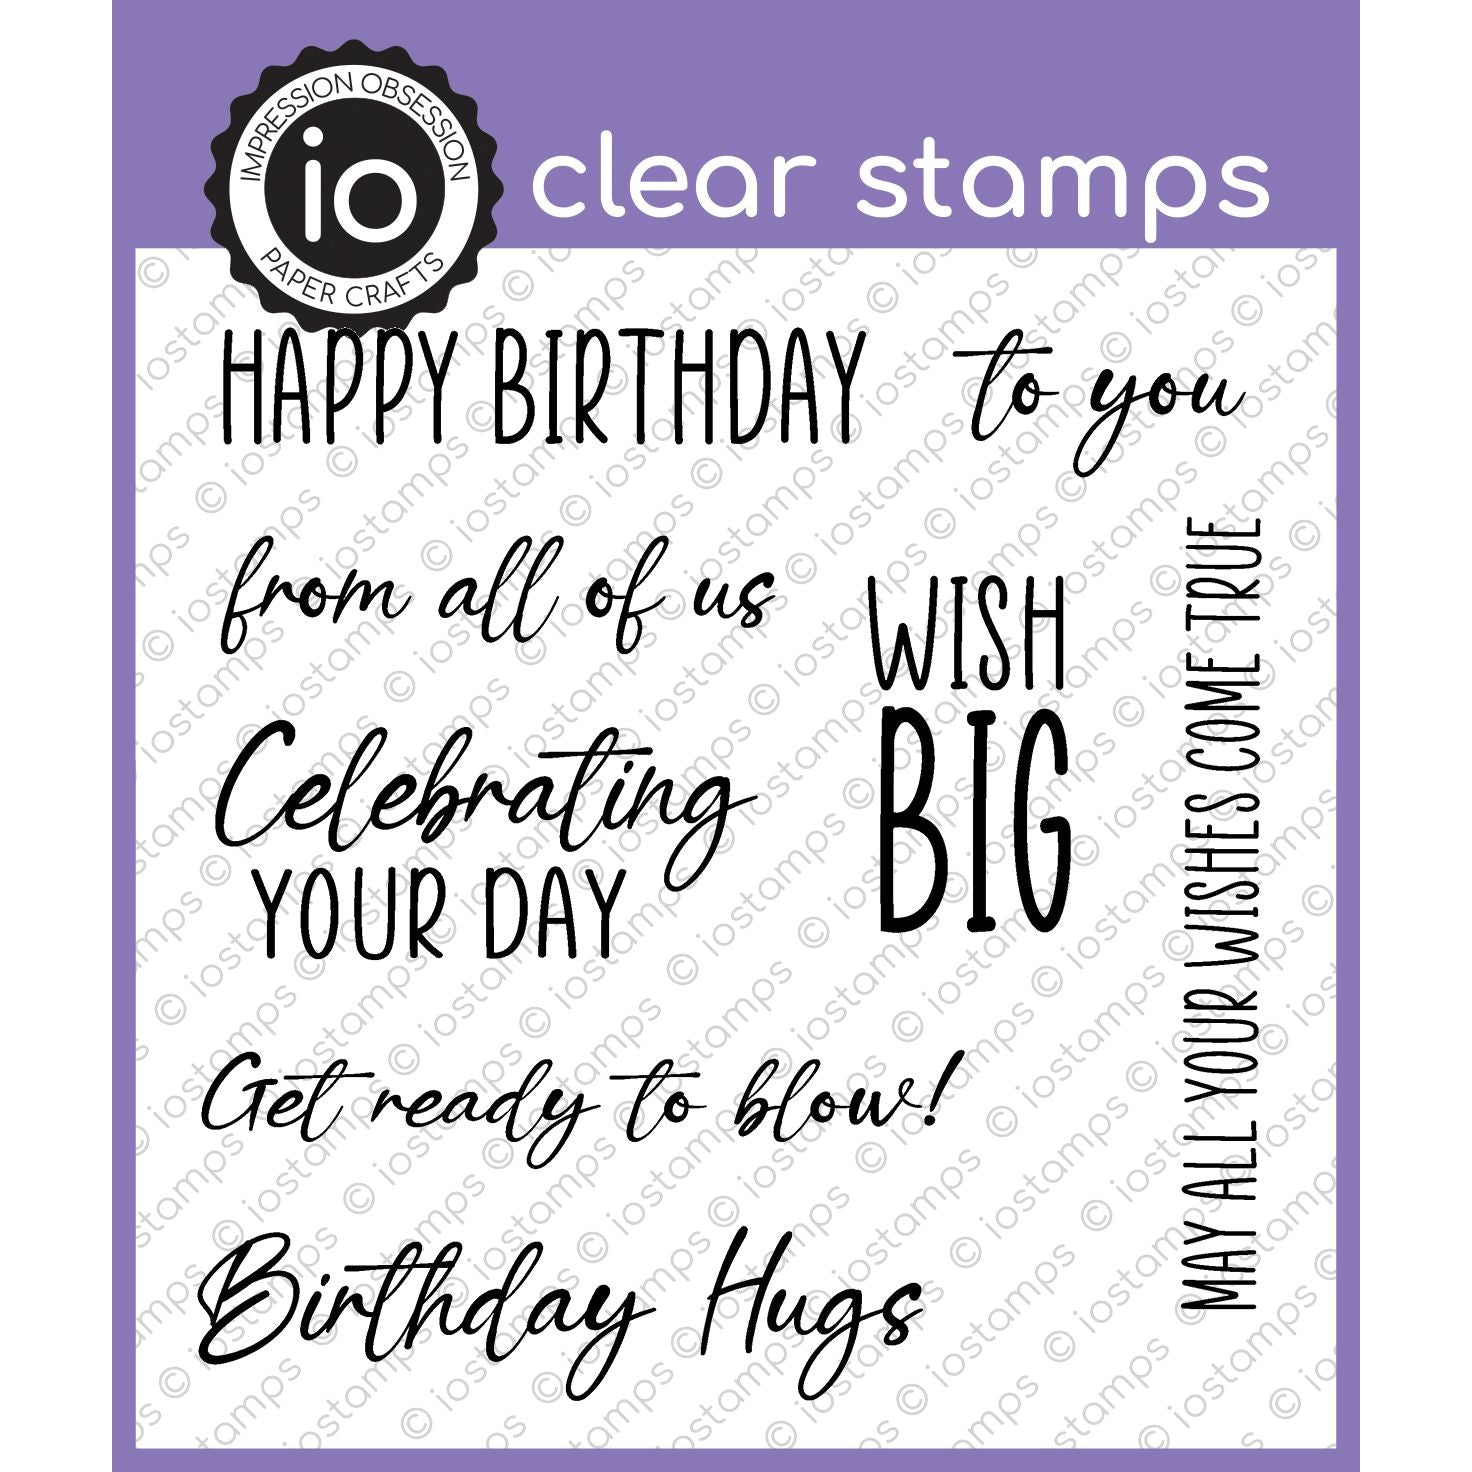 *NEW Birthday Cool Clear Stamps